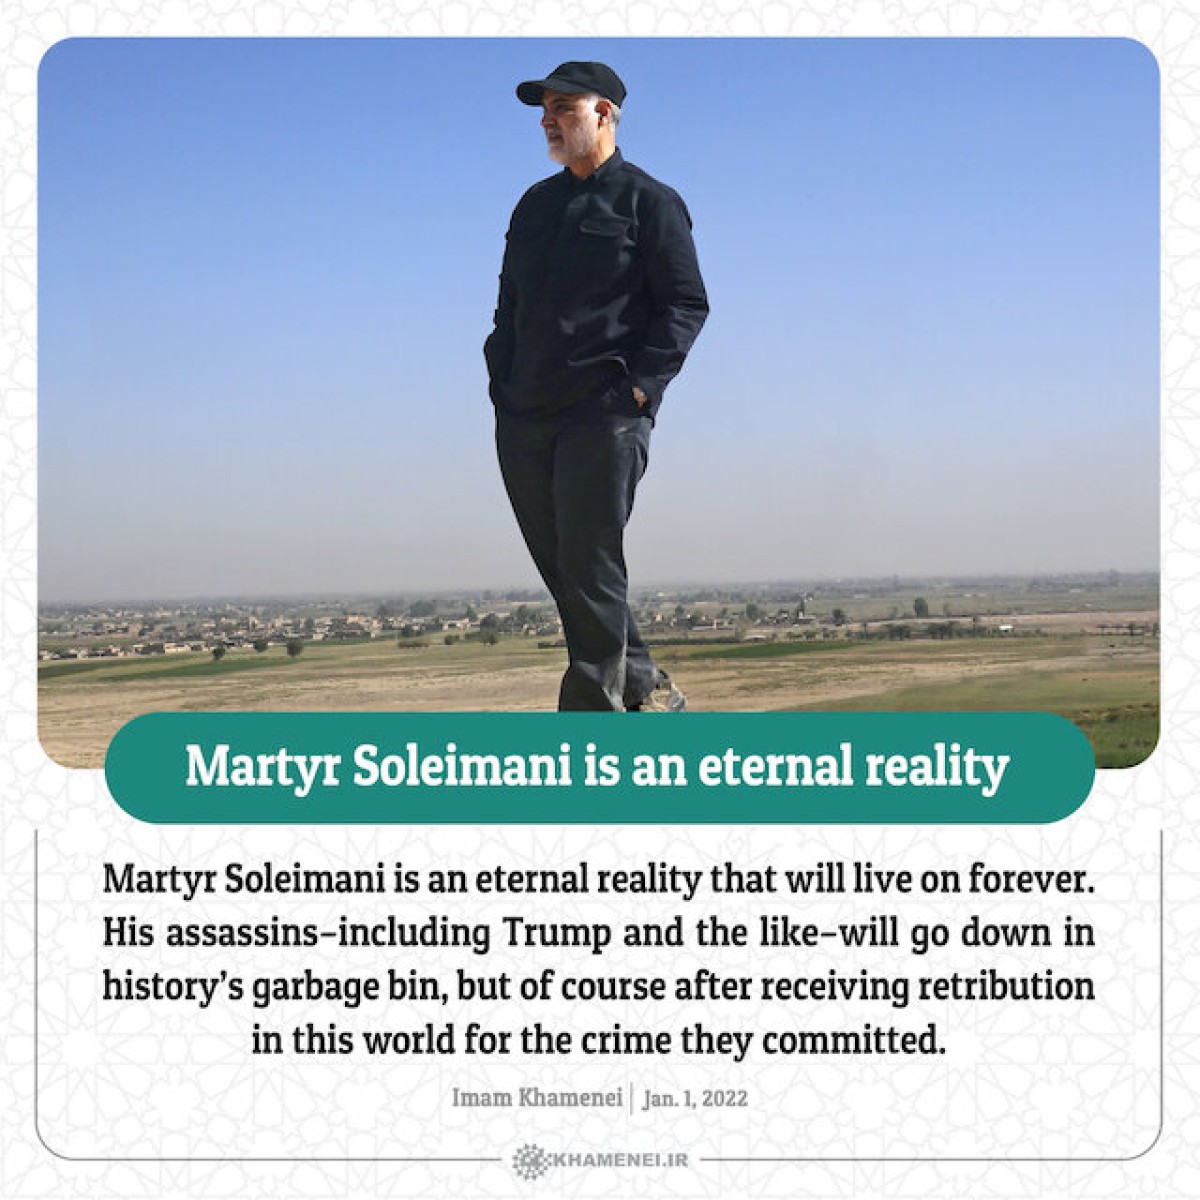 Martyr Soleimani is an eternal reality that will live on forever